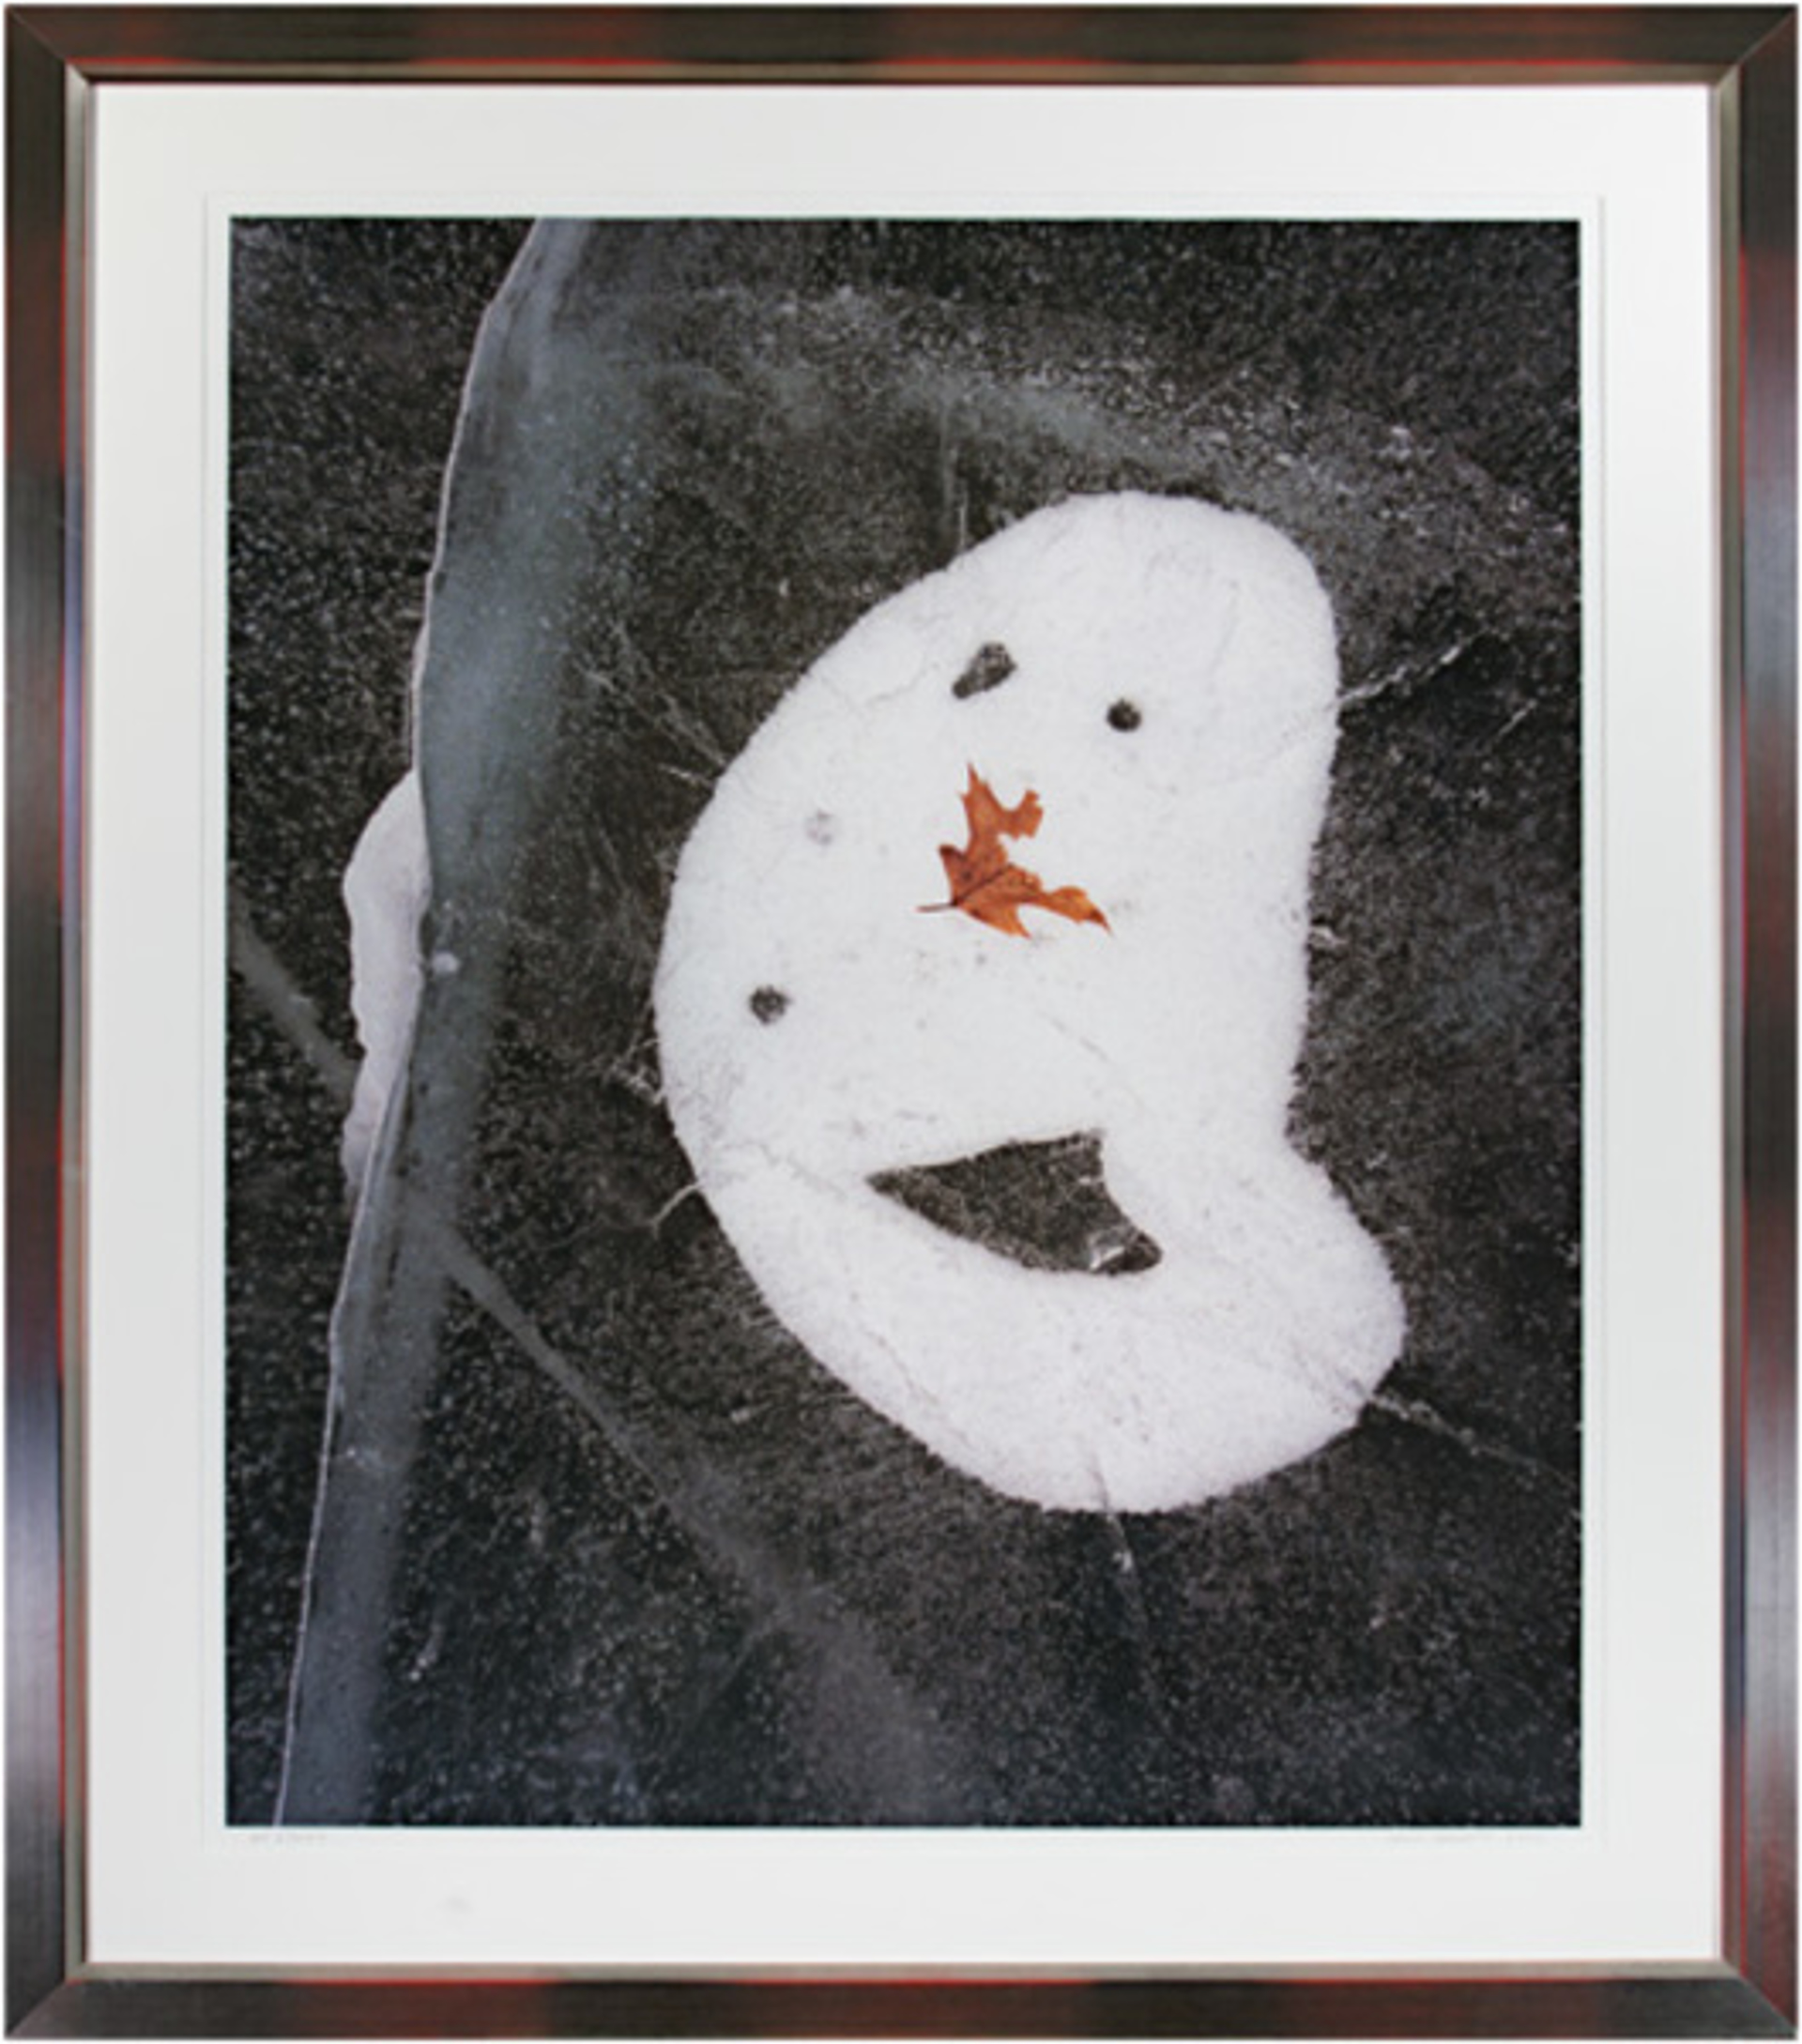 Frozen Faces Series-Do You Be-leaf It? by David Barnett